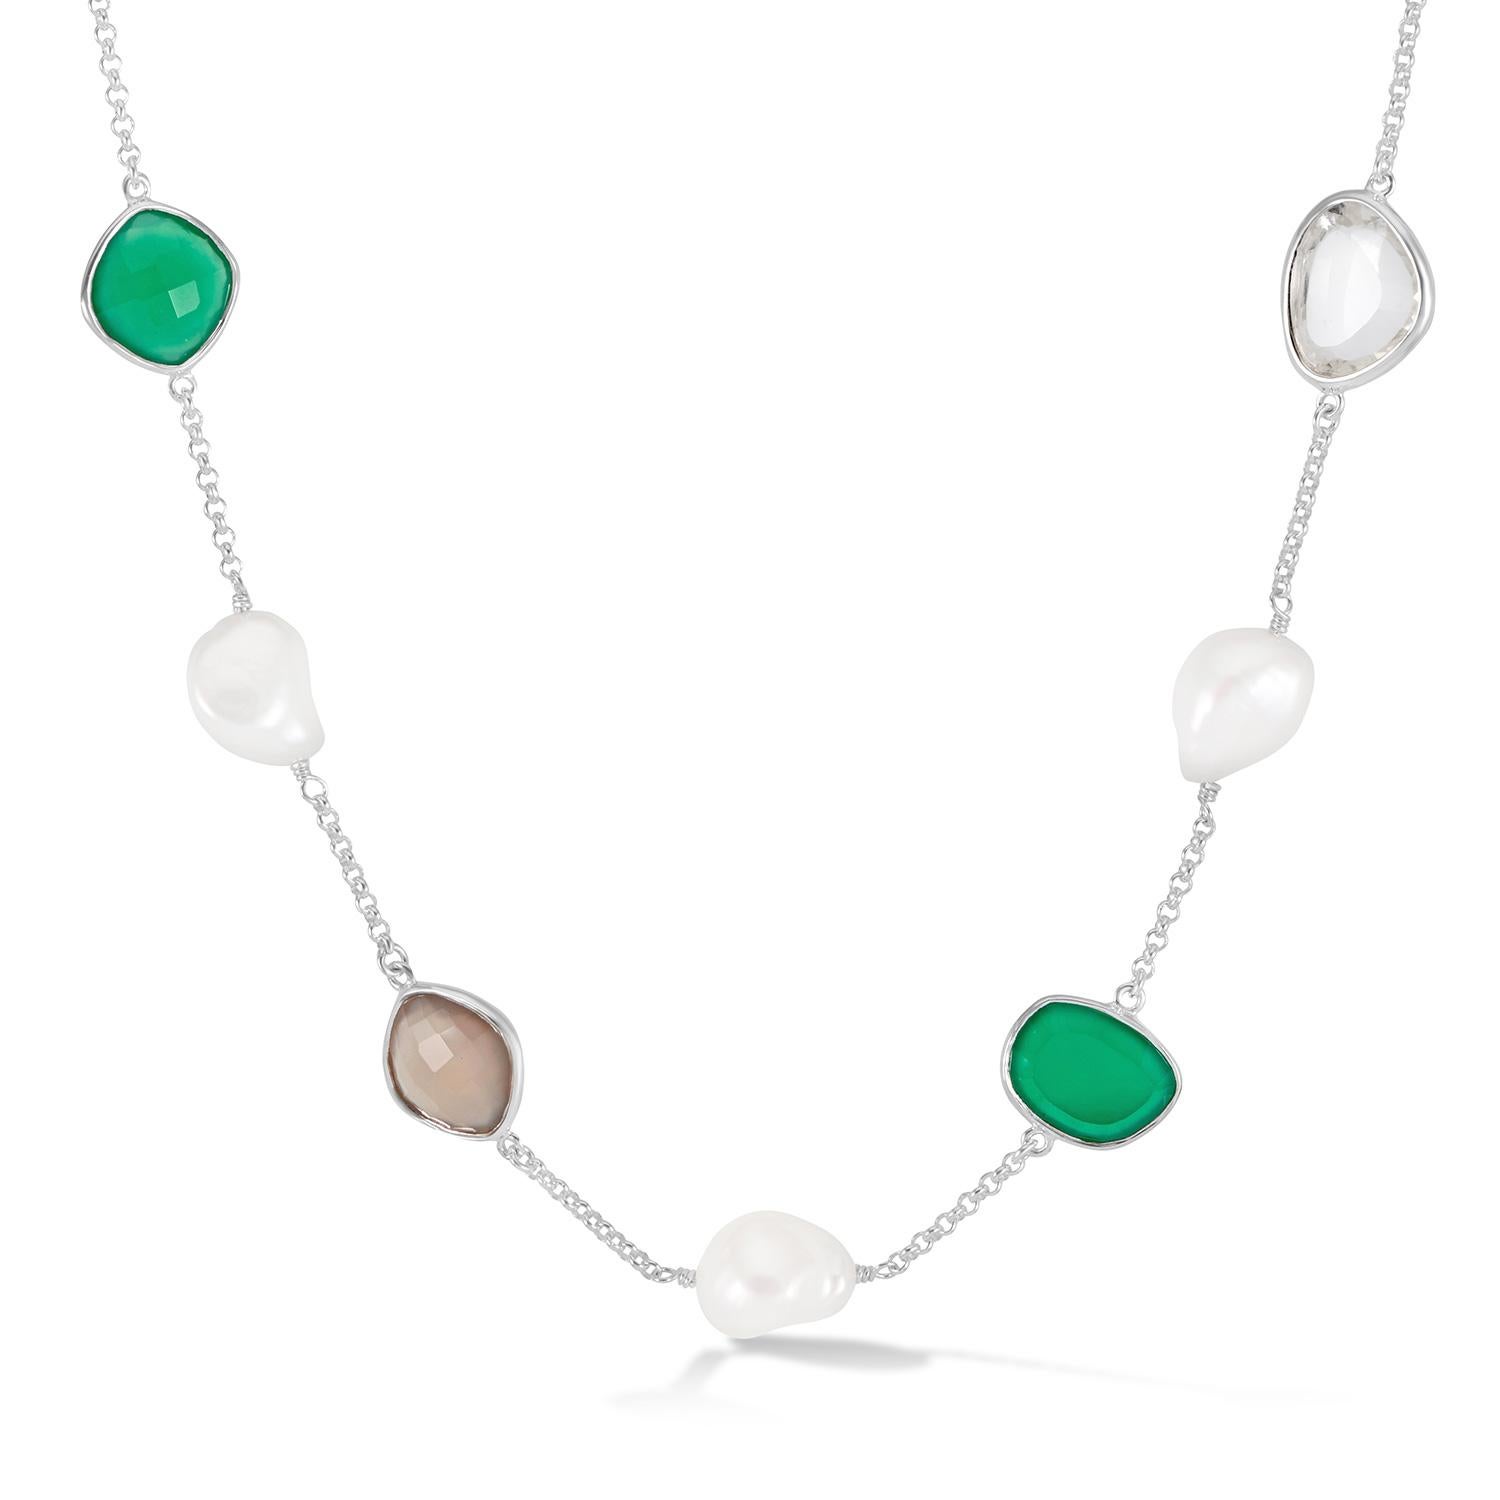 Handcrafted in sterling silver, this chain necklace is adorned with five white baroque pearls and four faceted gemstones in a mix of green onyx, grey agate, lemon quartz and rock crystal. Baroque pearls are naturally irregular in shape and known for